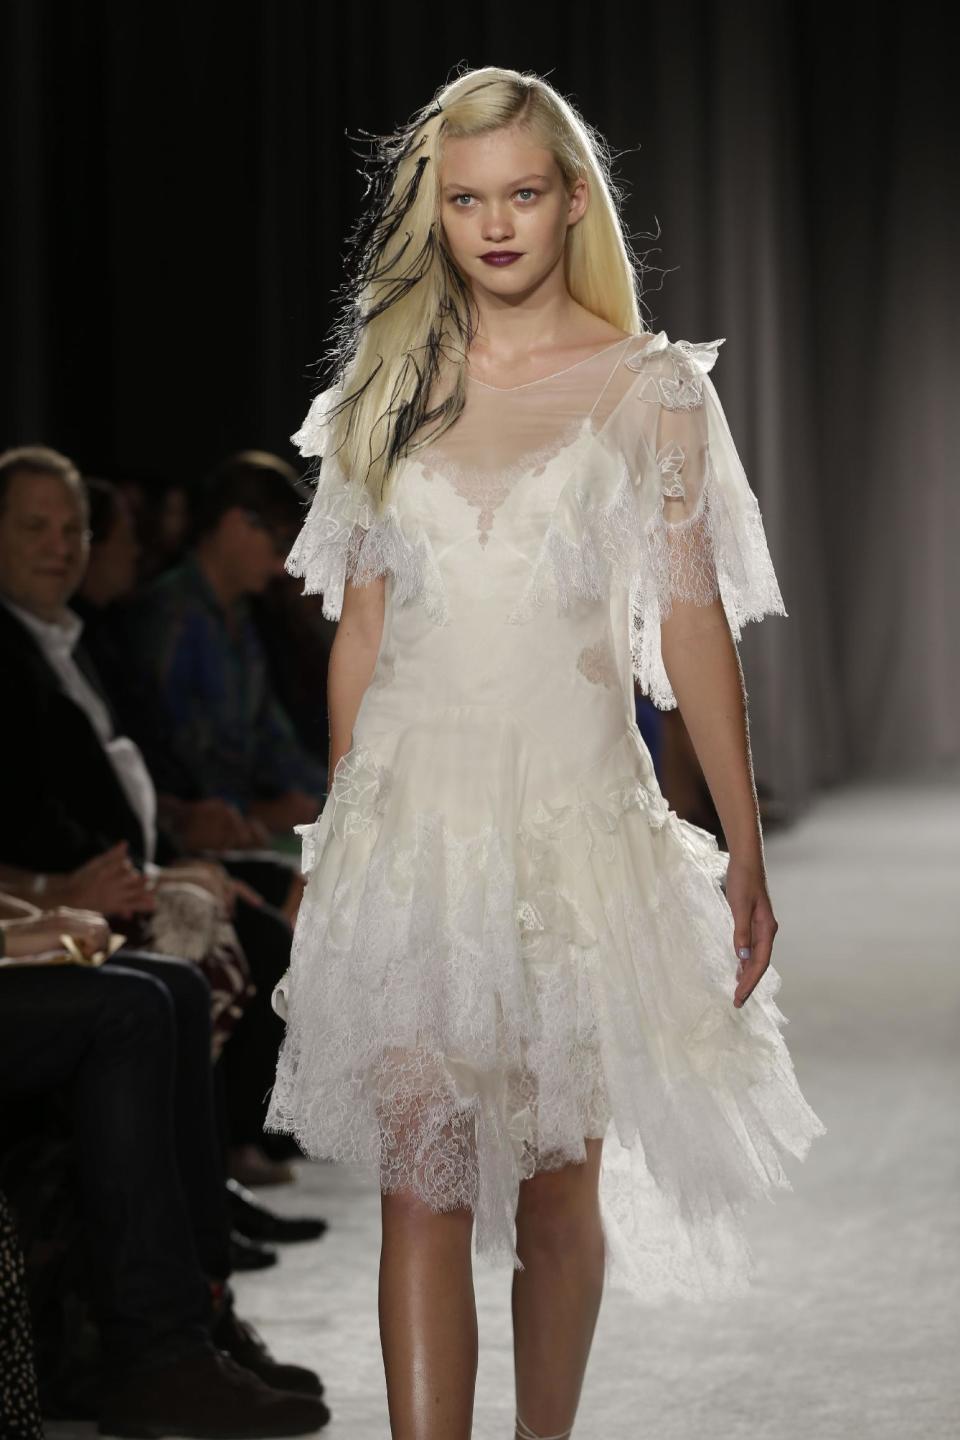 The Marchesa Spring 2014 collection is modeled during Fashion Week in New York, Wednesday, Sept. 11, 2013. (AP Photo/Seth Wenig)